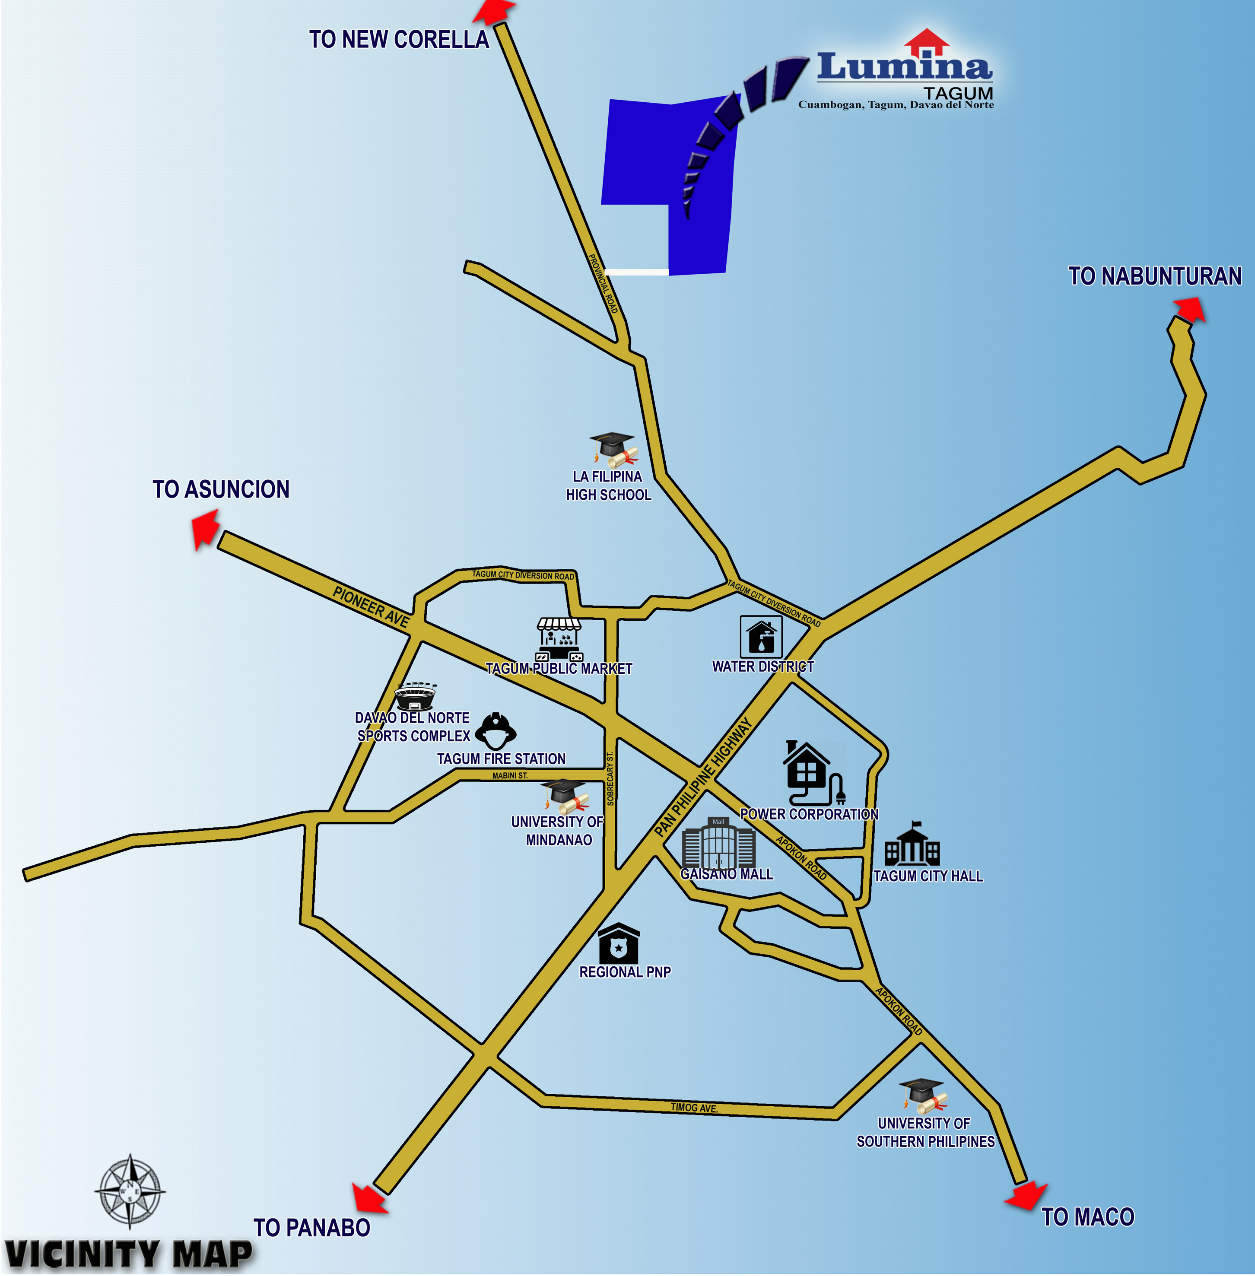 VICINITY-MAP-1645421583.png